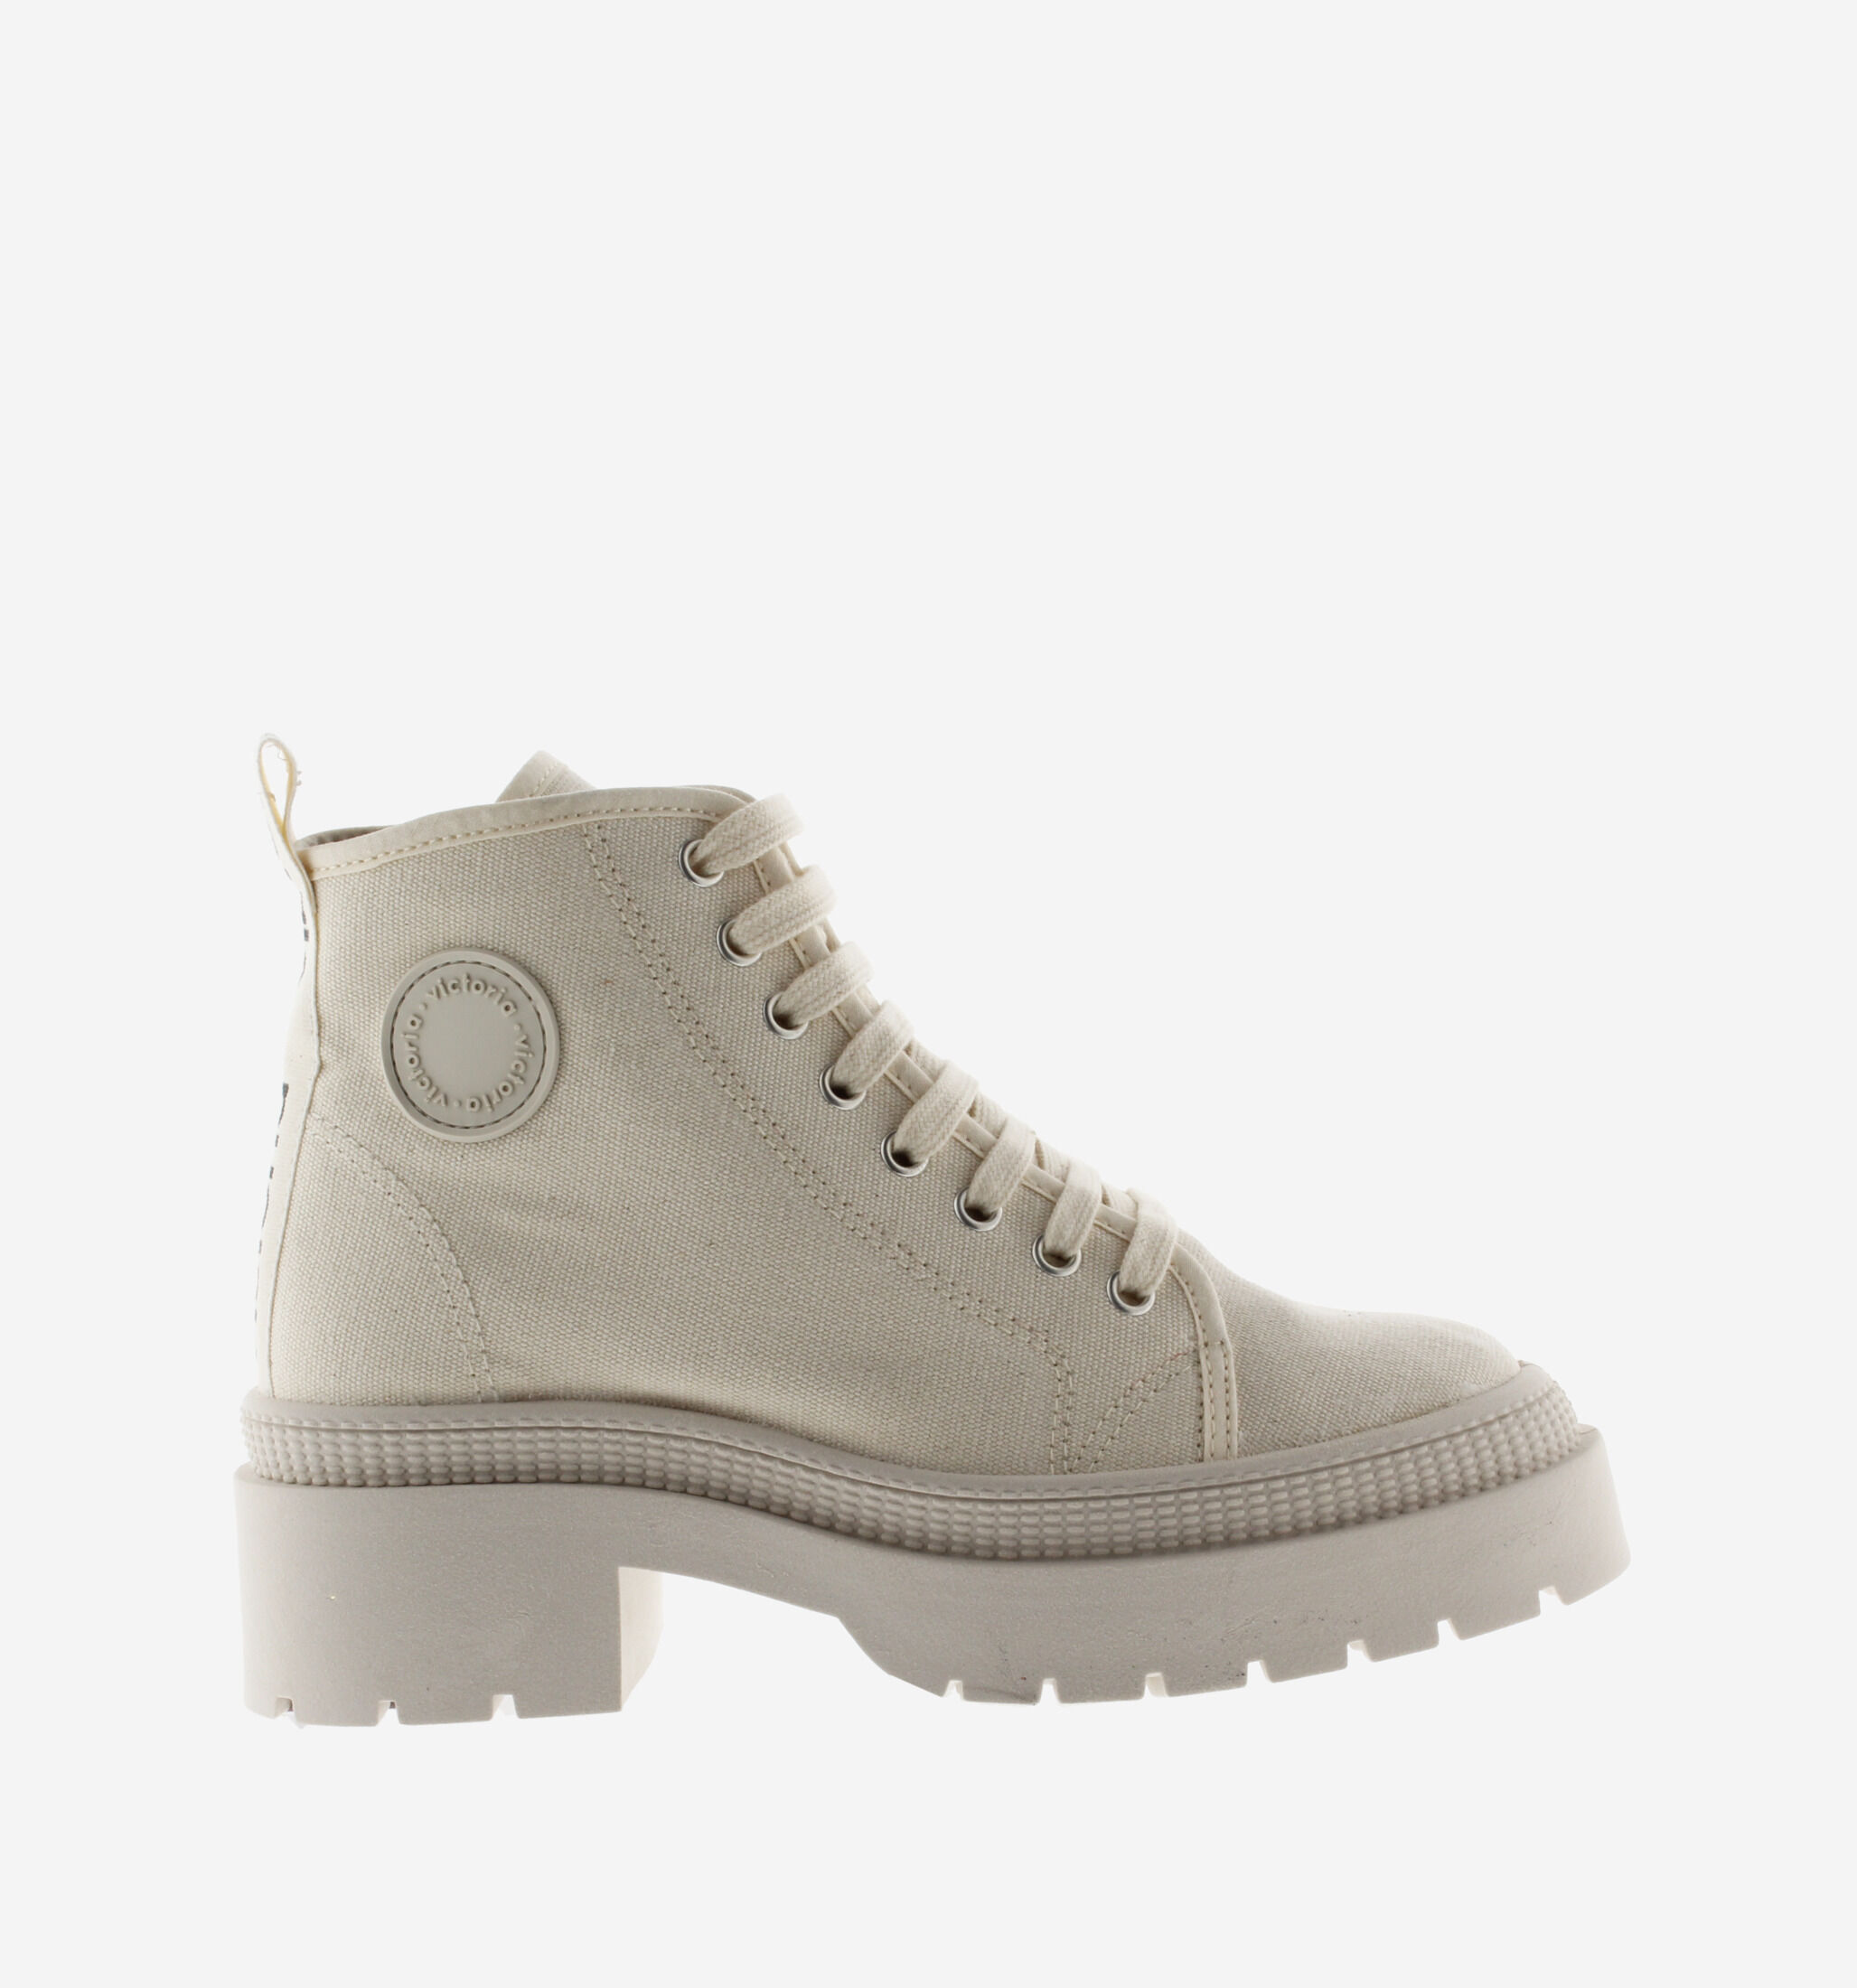 Pull&Bear canvas lace front heeled boots in beige | ASOS